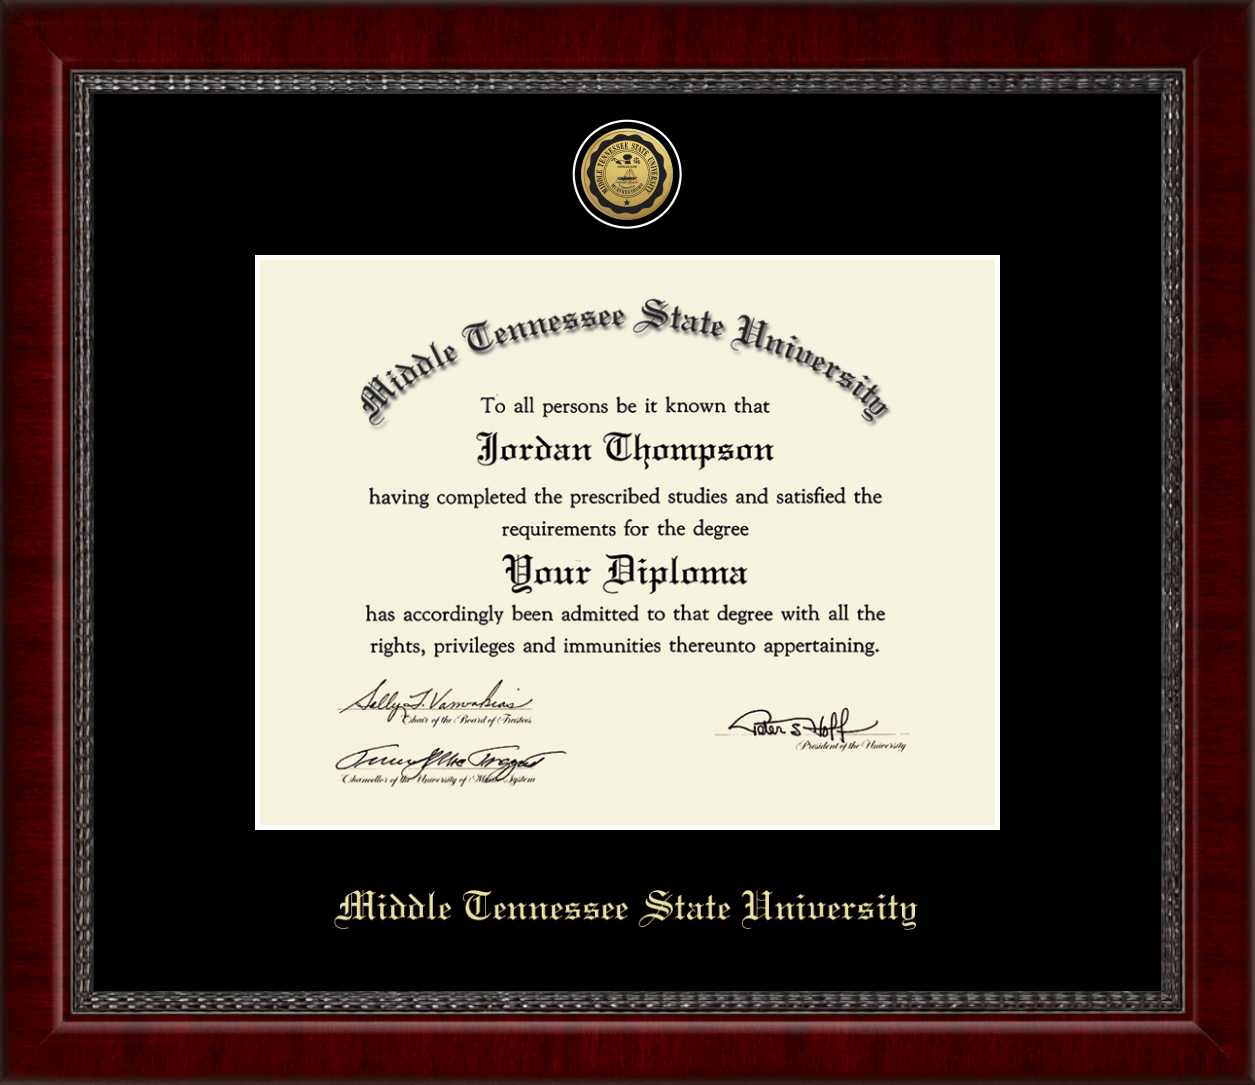 Matte Mahogany, 20 x 20 Signature Announcements Middle Tennessee State University Graduate Graduation Diploma Frame with Sculpted Foil Seal /& Name MTSU